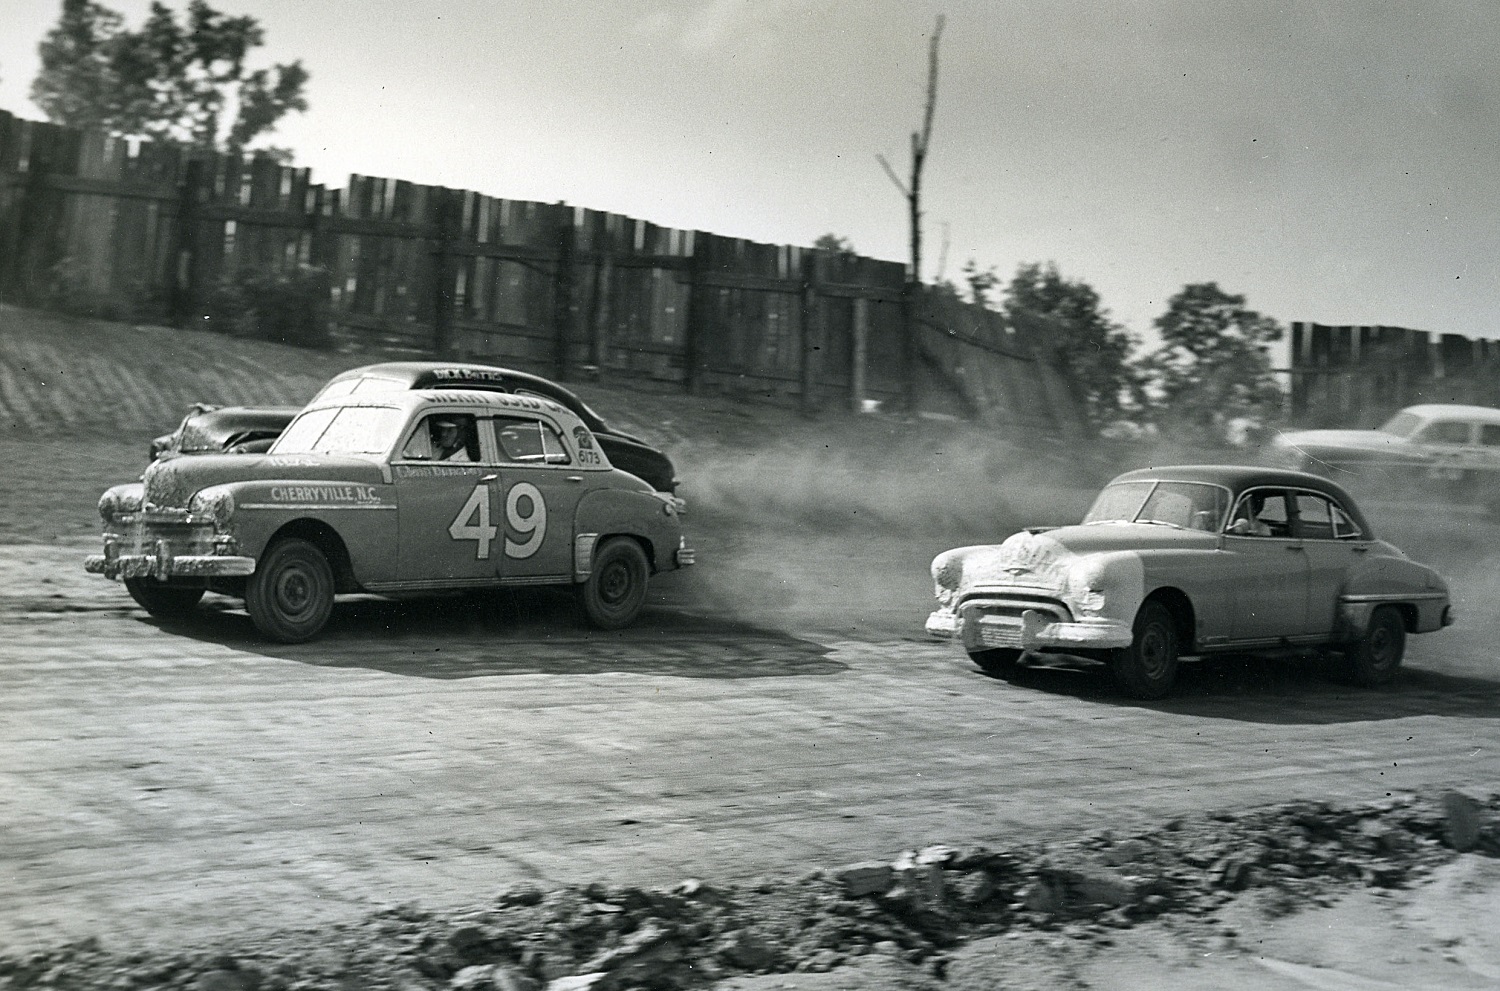 Glenn Dunnaway, left, battles with the field during the NASCAR race at Charlotte Speedway in June 1950.